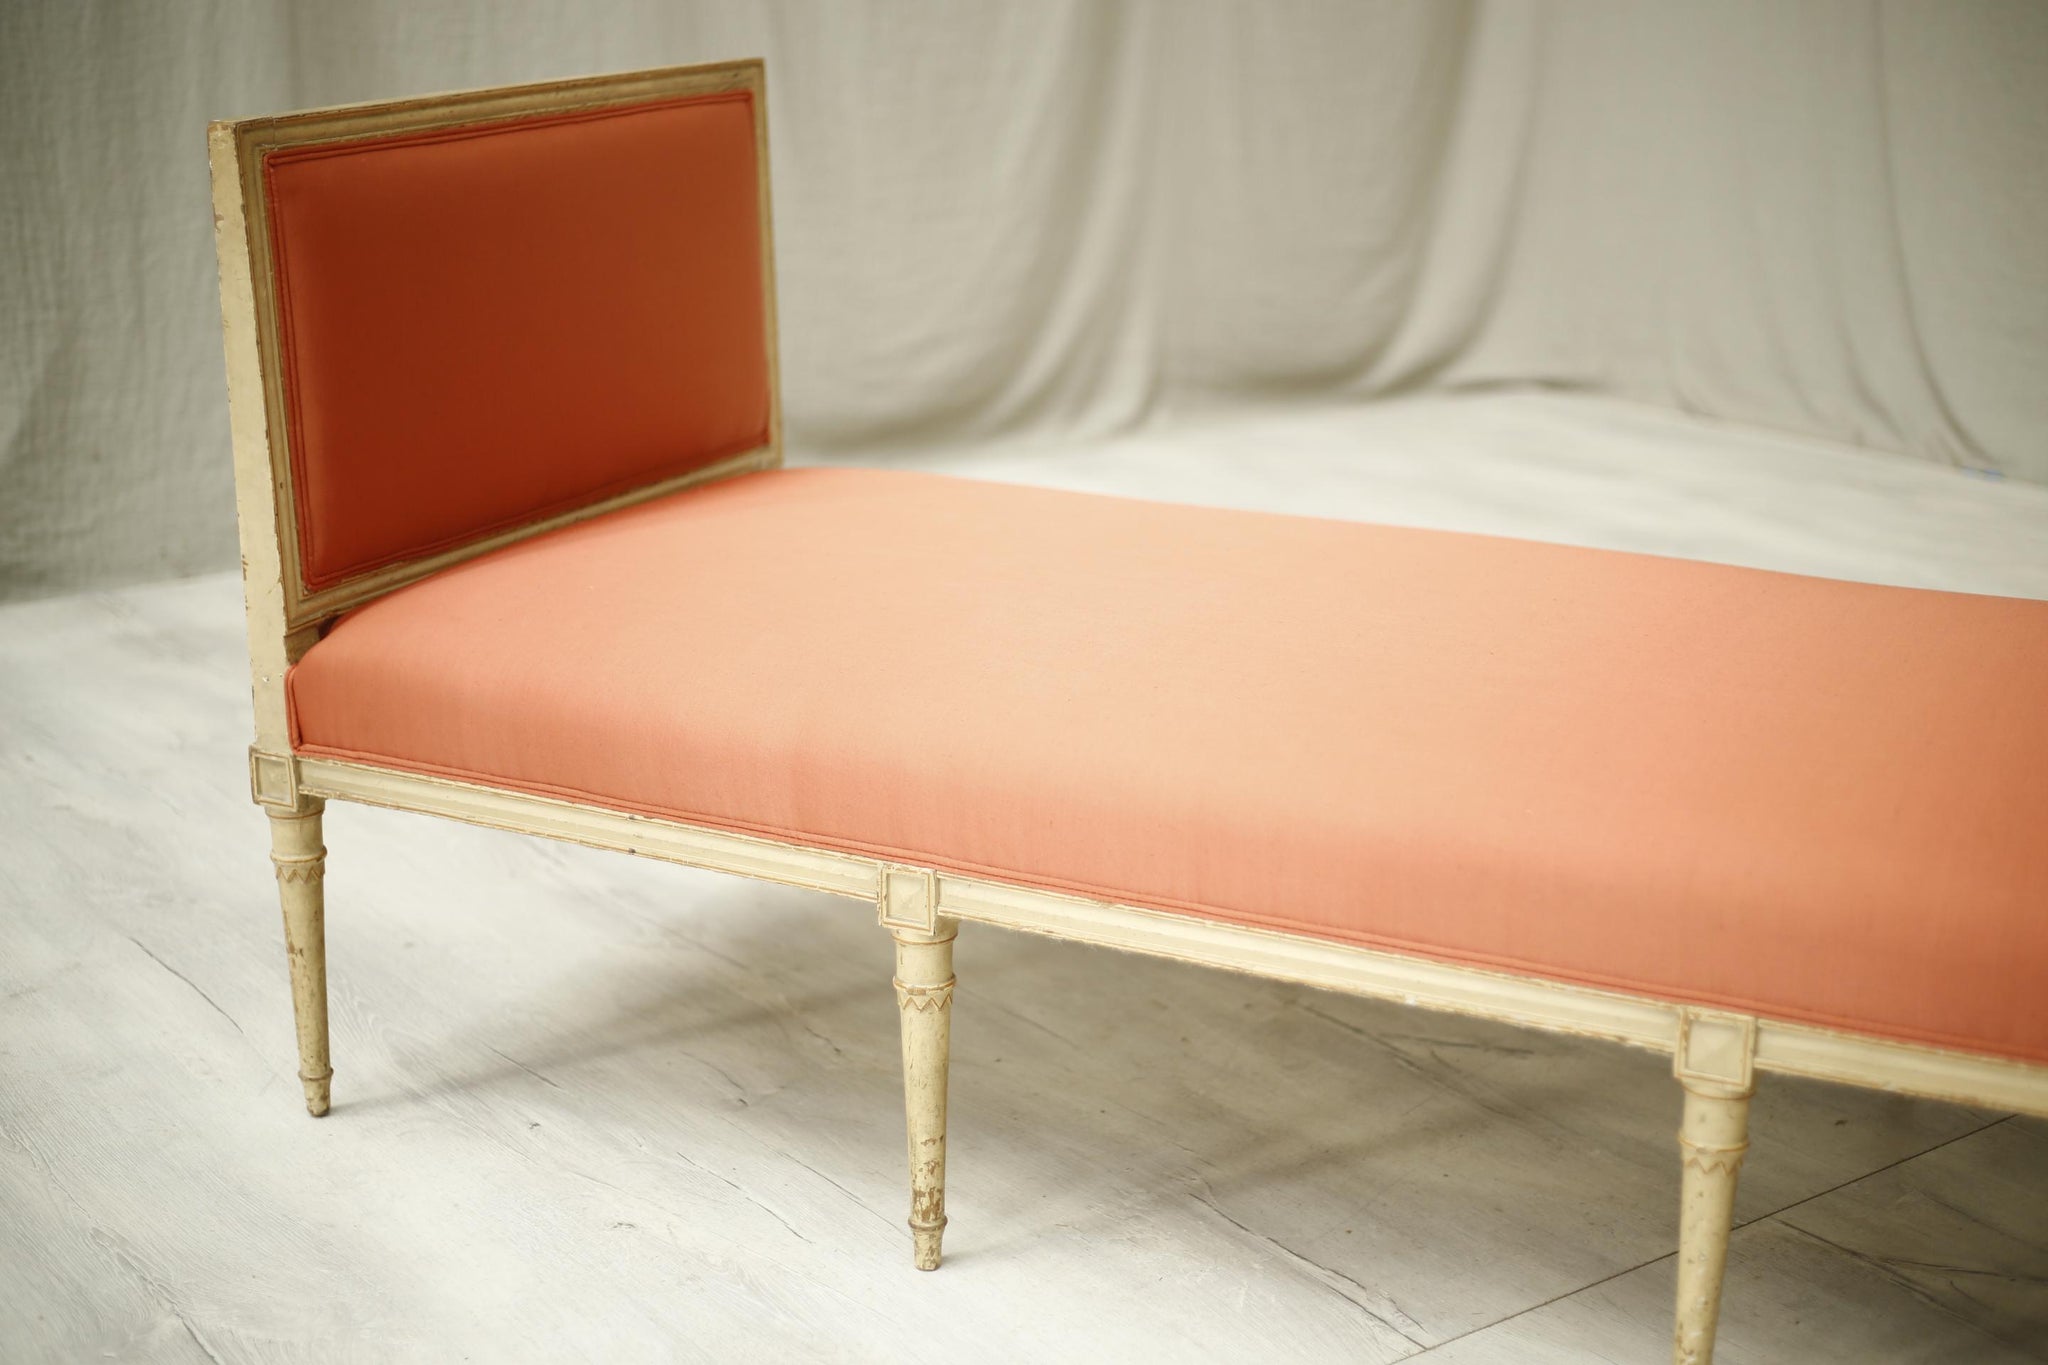 19th century French painted daybed - TallBoy Interiors